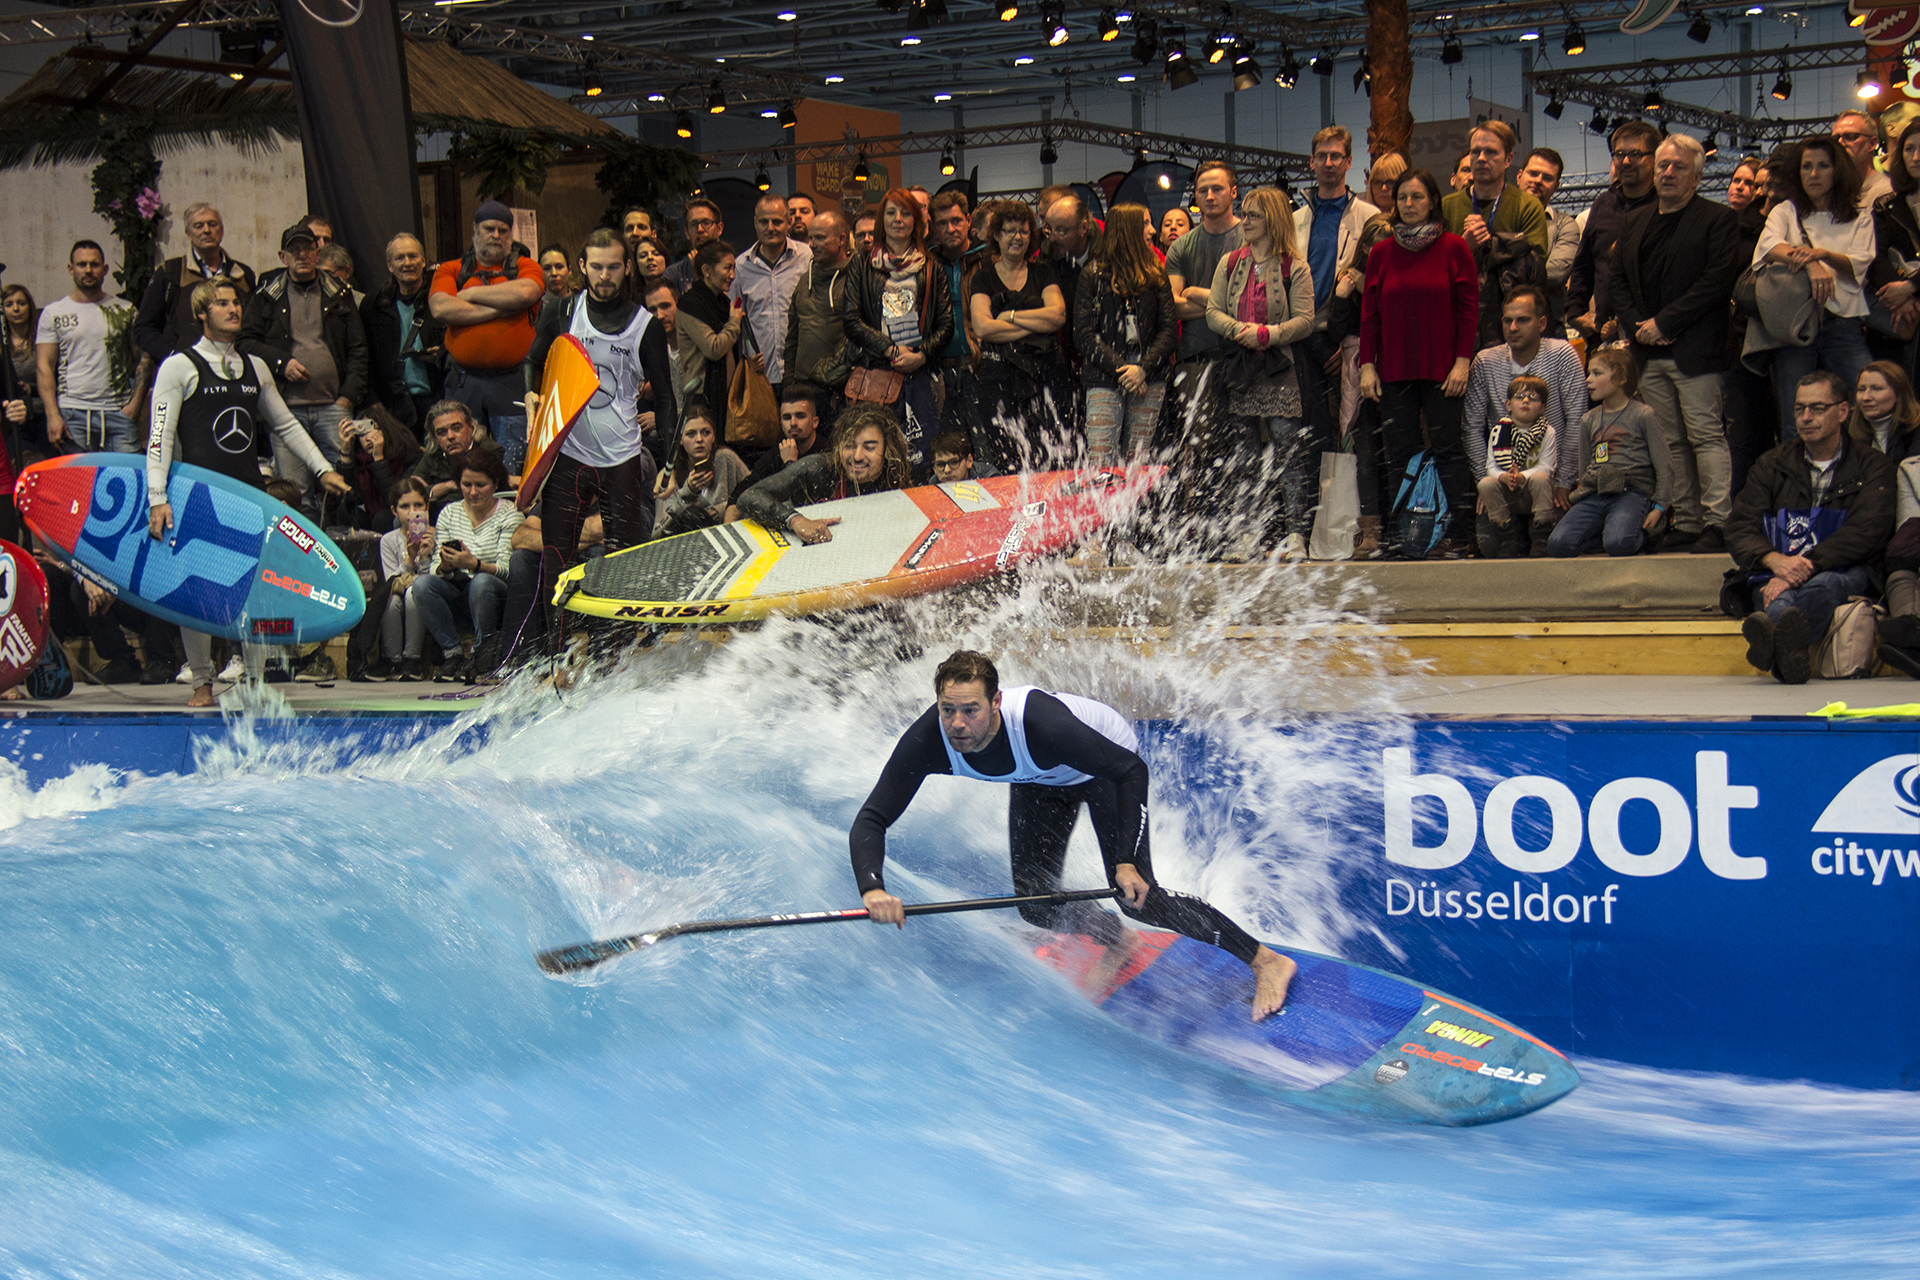 The wave at Dusseldorf Boot Show 2018